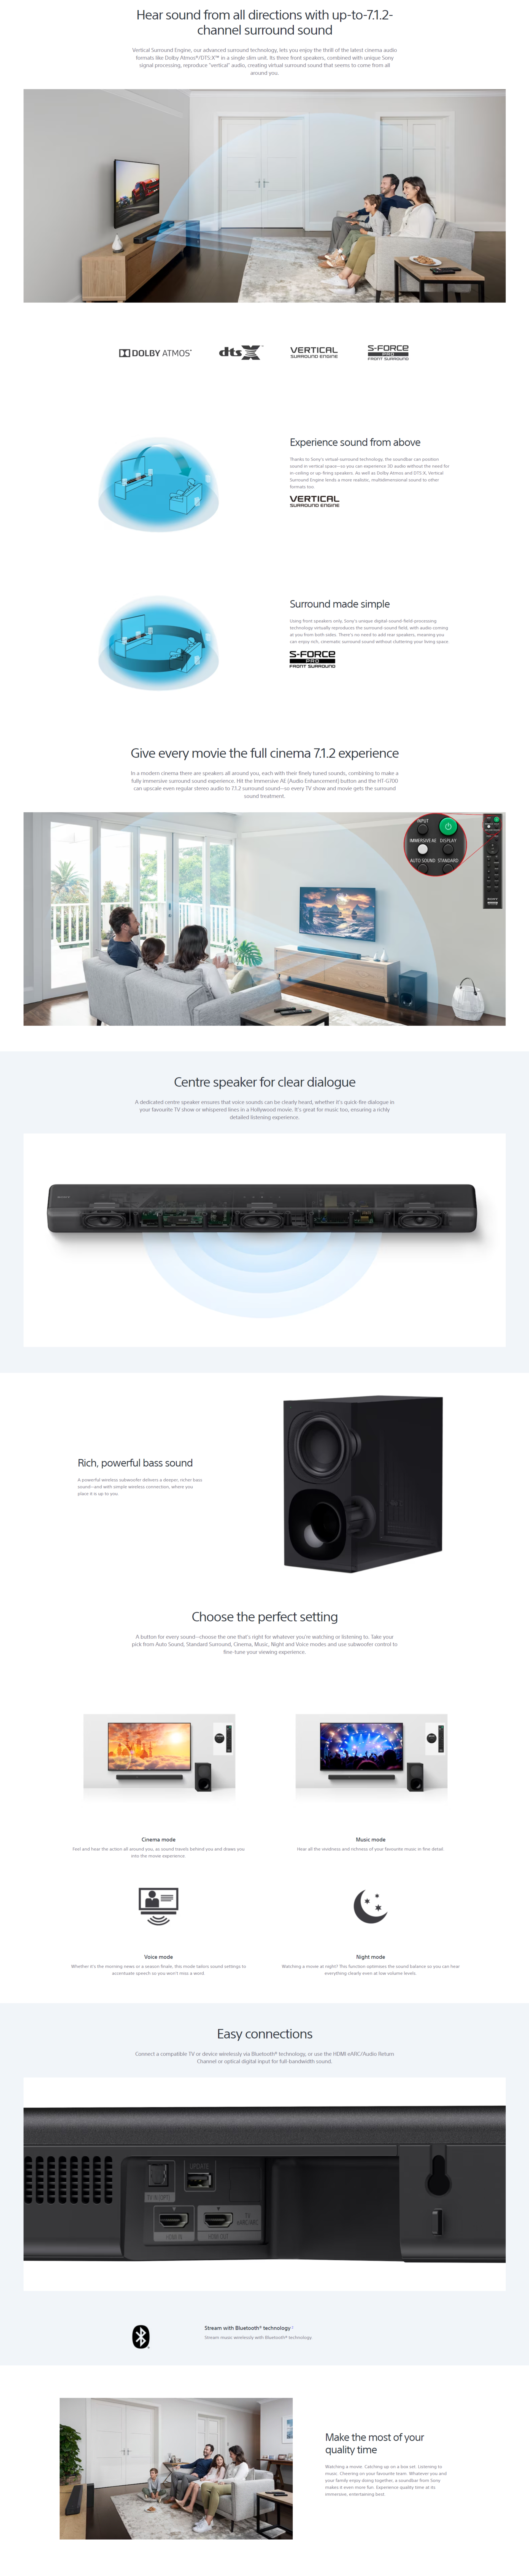 Sony HT-G700 3.1-Channel Dolby Atmos and DTS:X Soundbar with Wireless Subwoofer( Bluetooth & USB Connectivity, Wireless Subwoofer, Dolby Atmos)(HTG700)